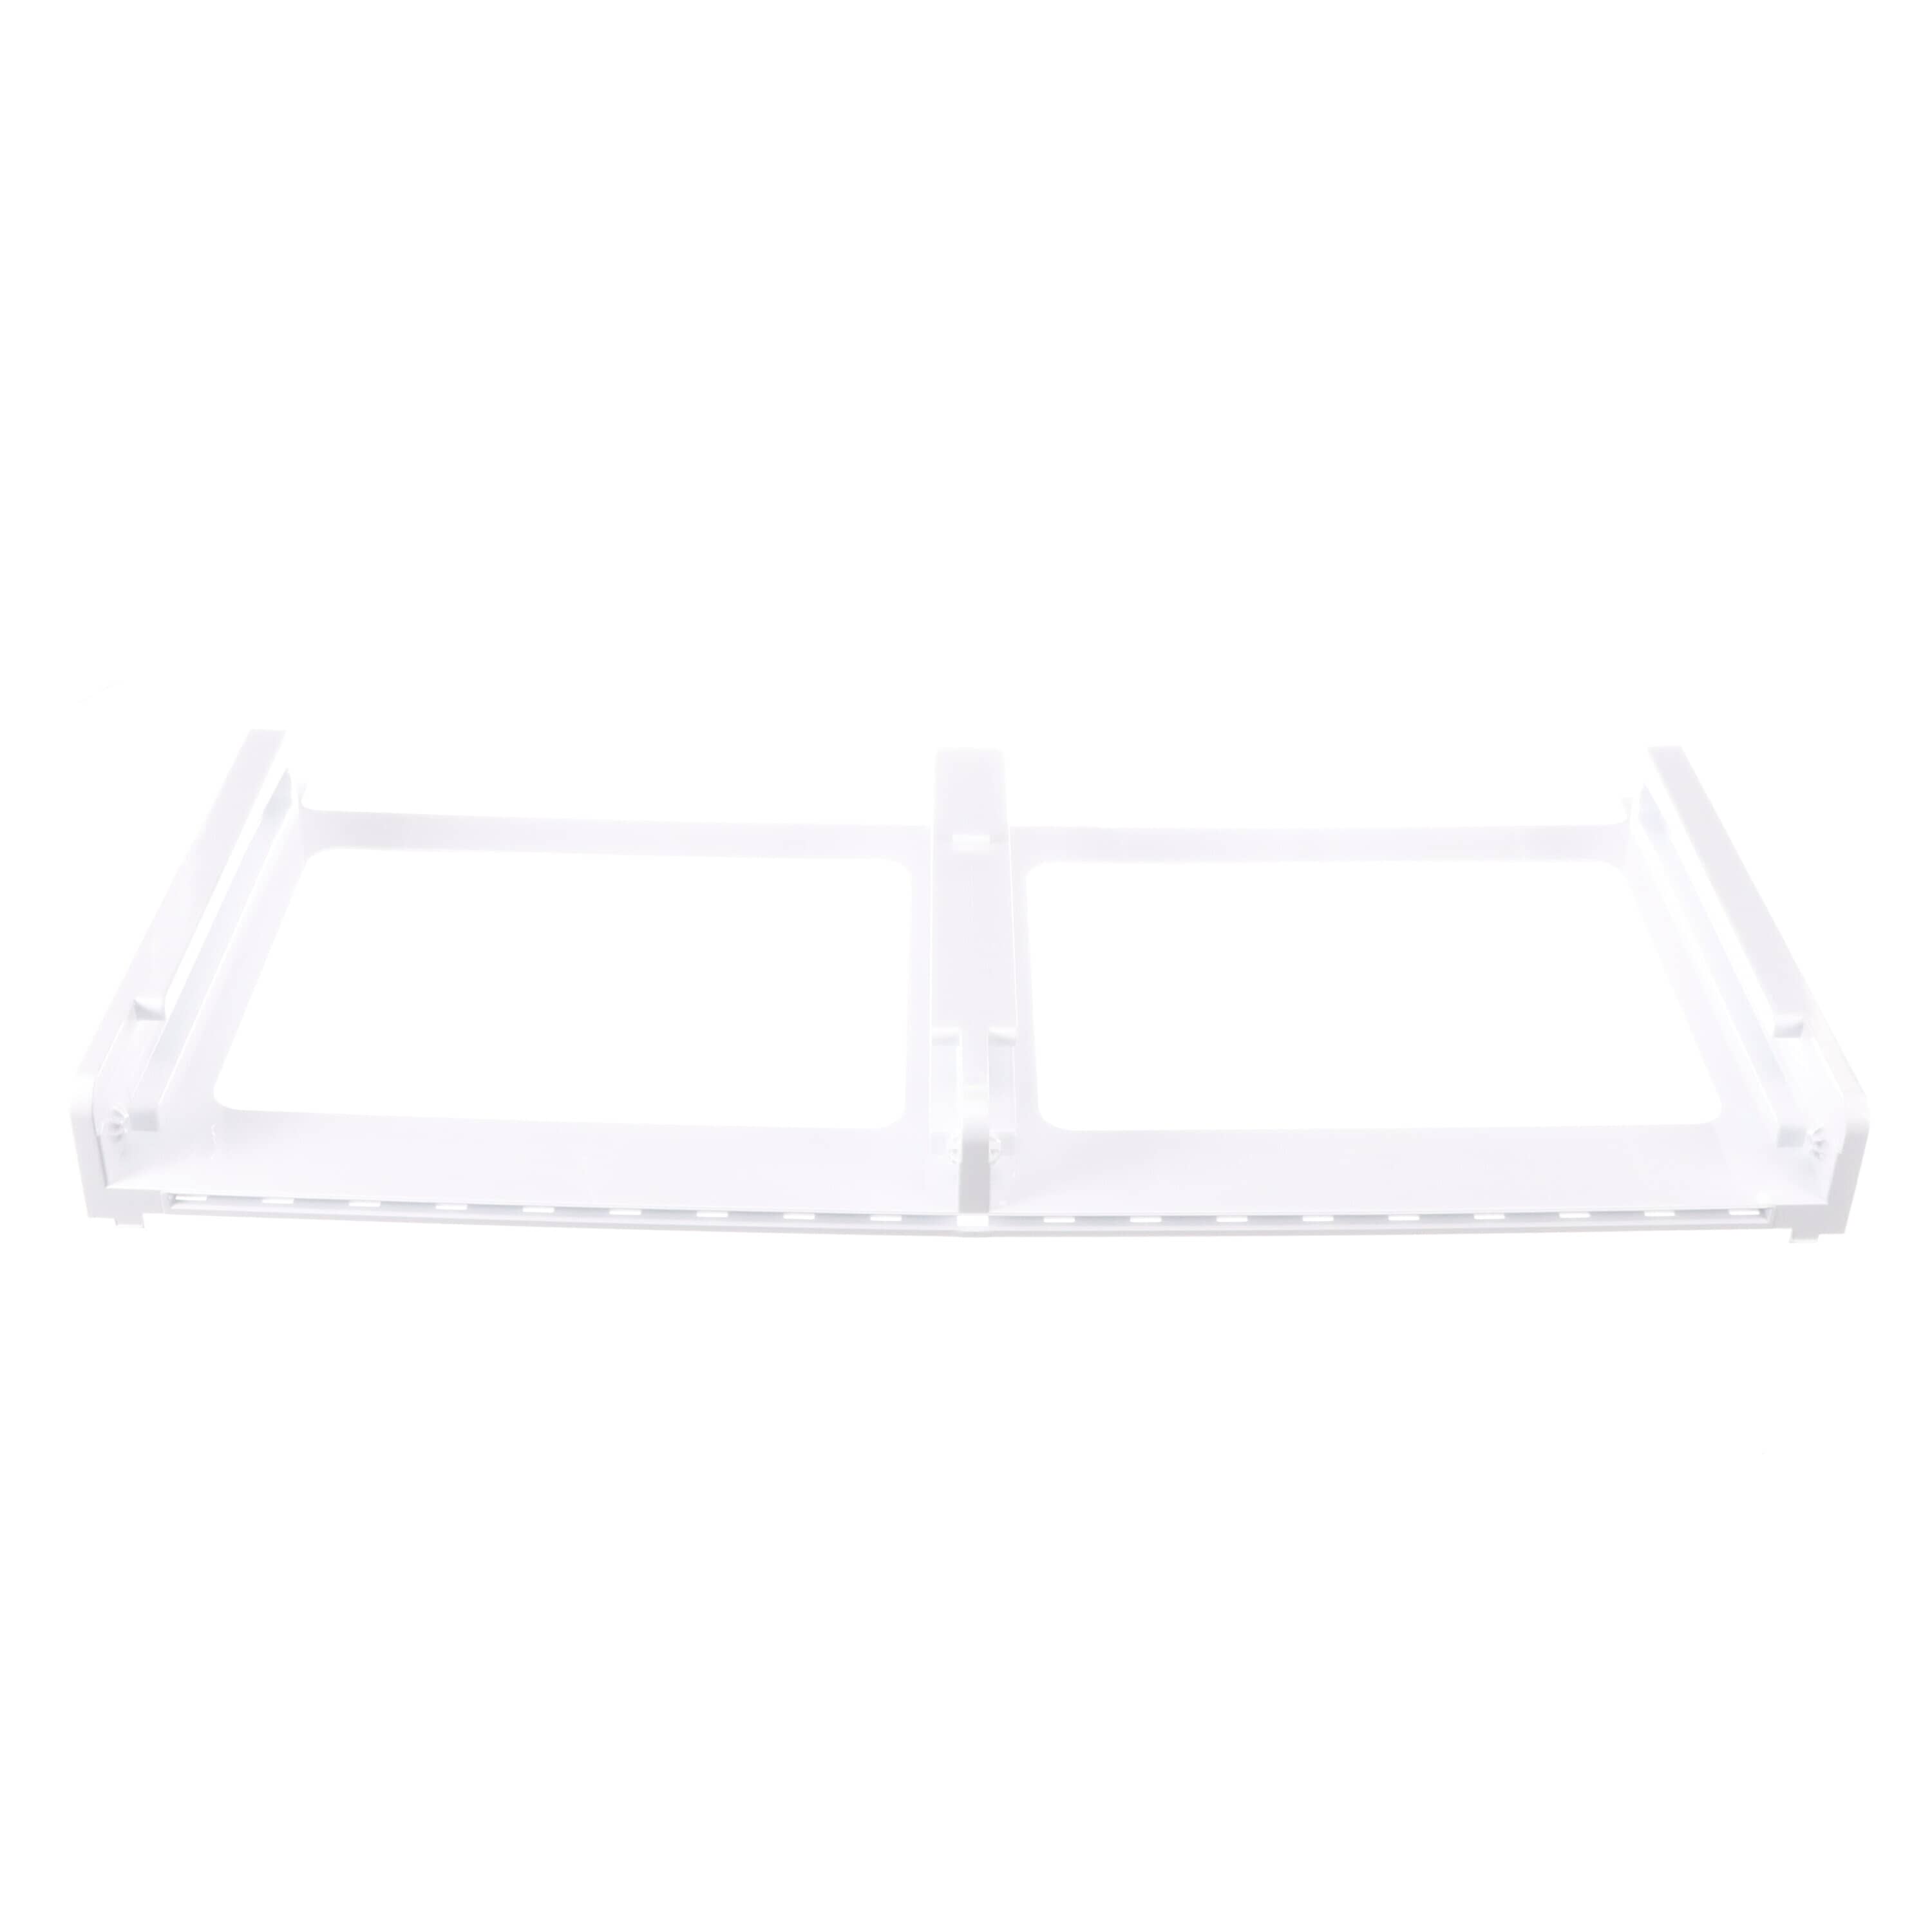 LG MCK70185002 Cover, Tray